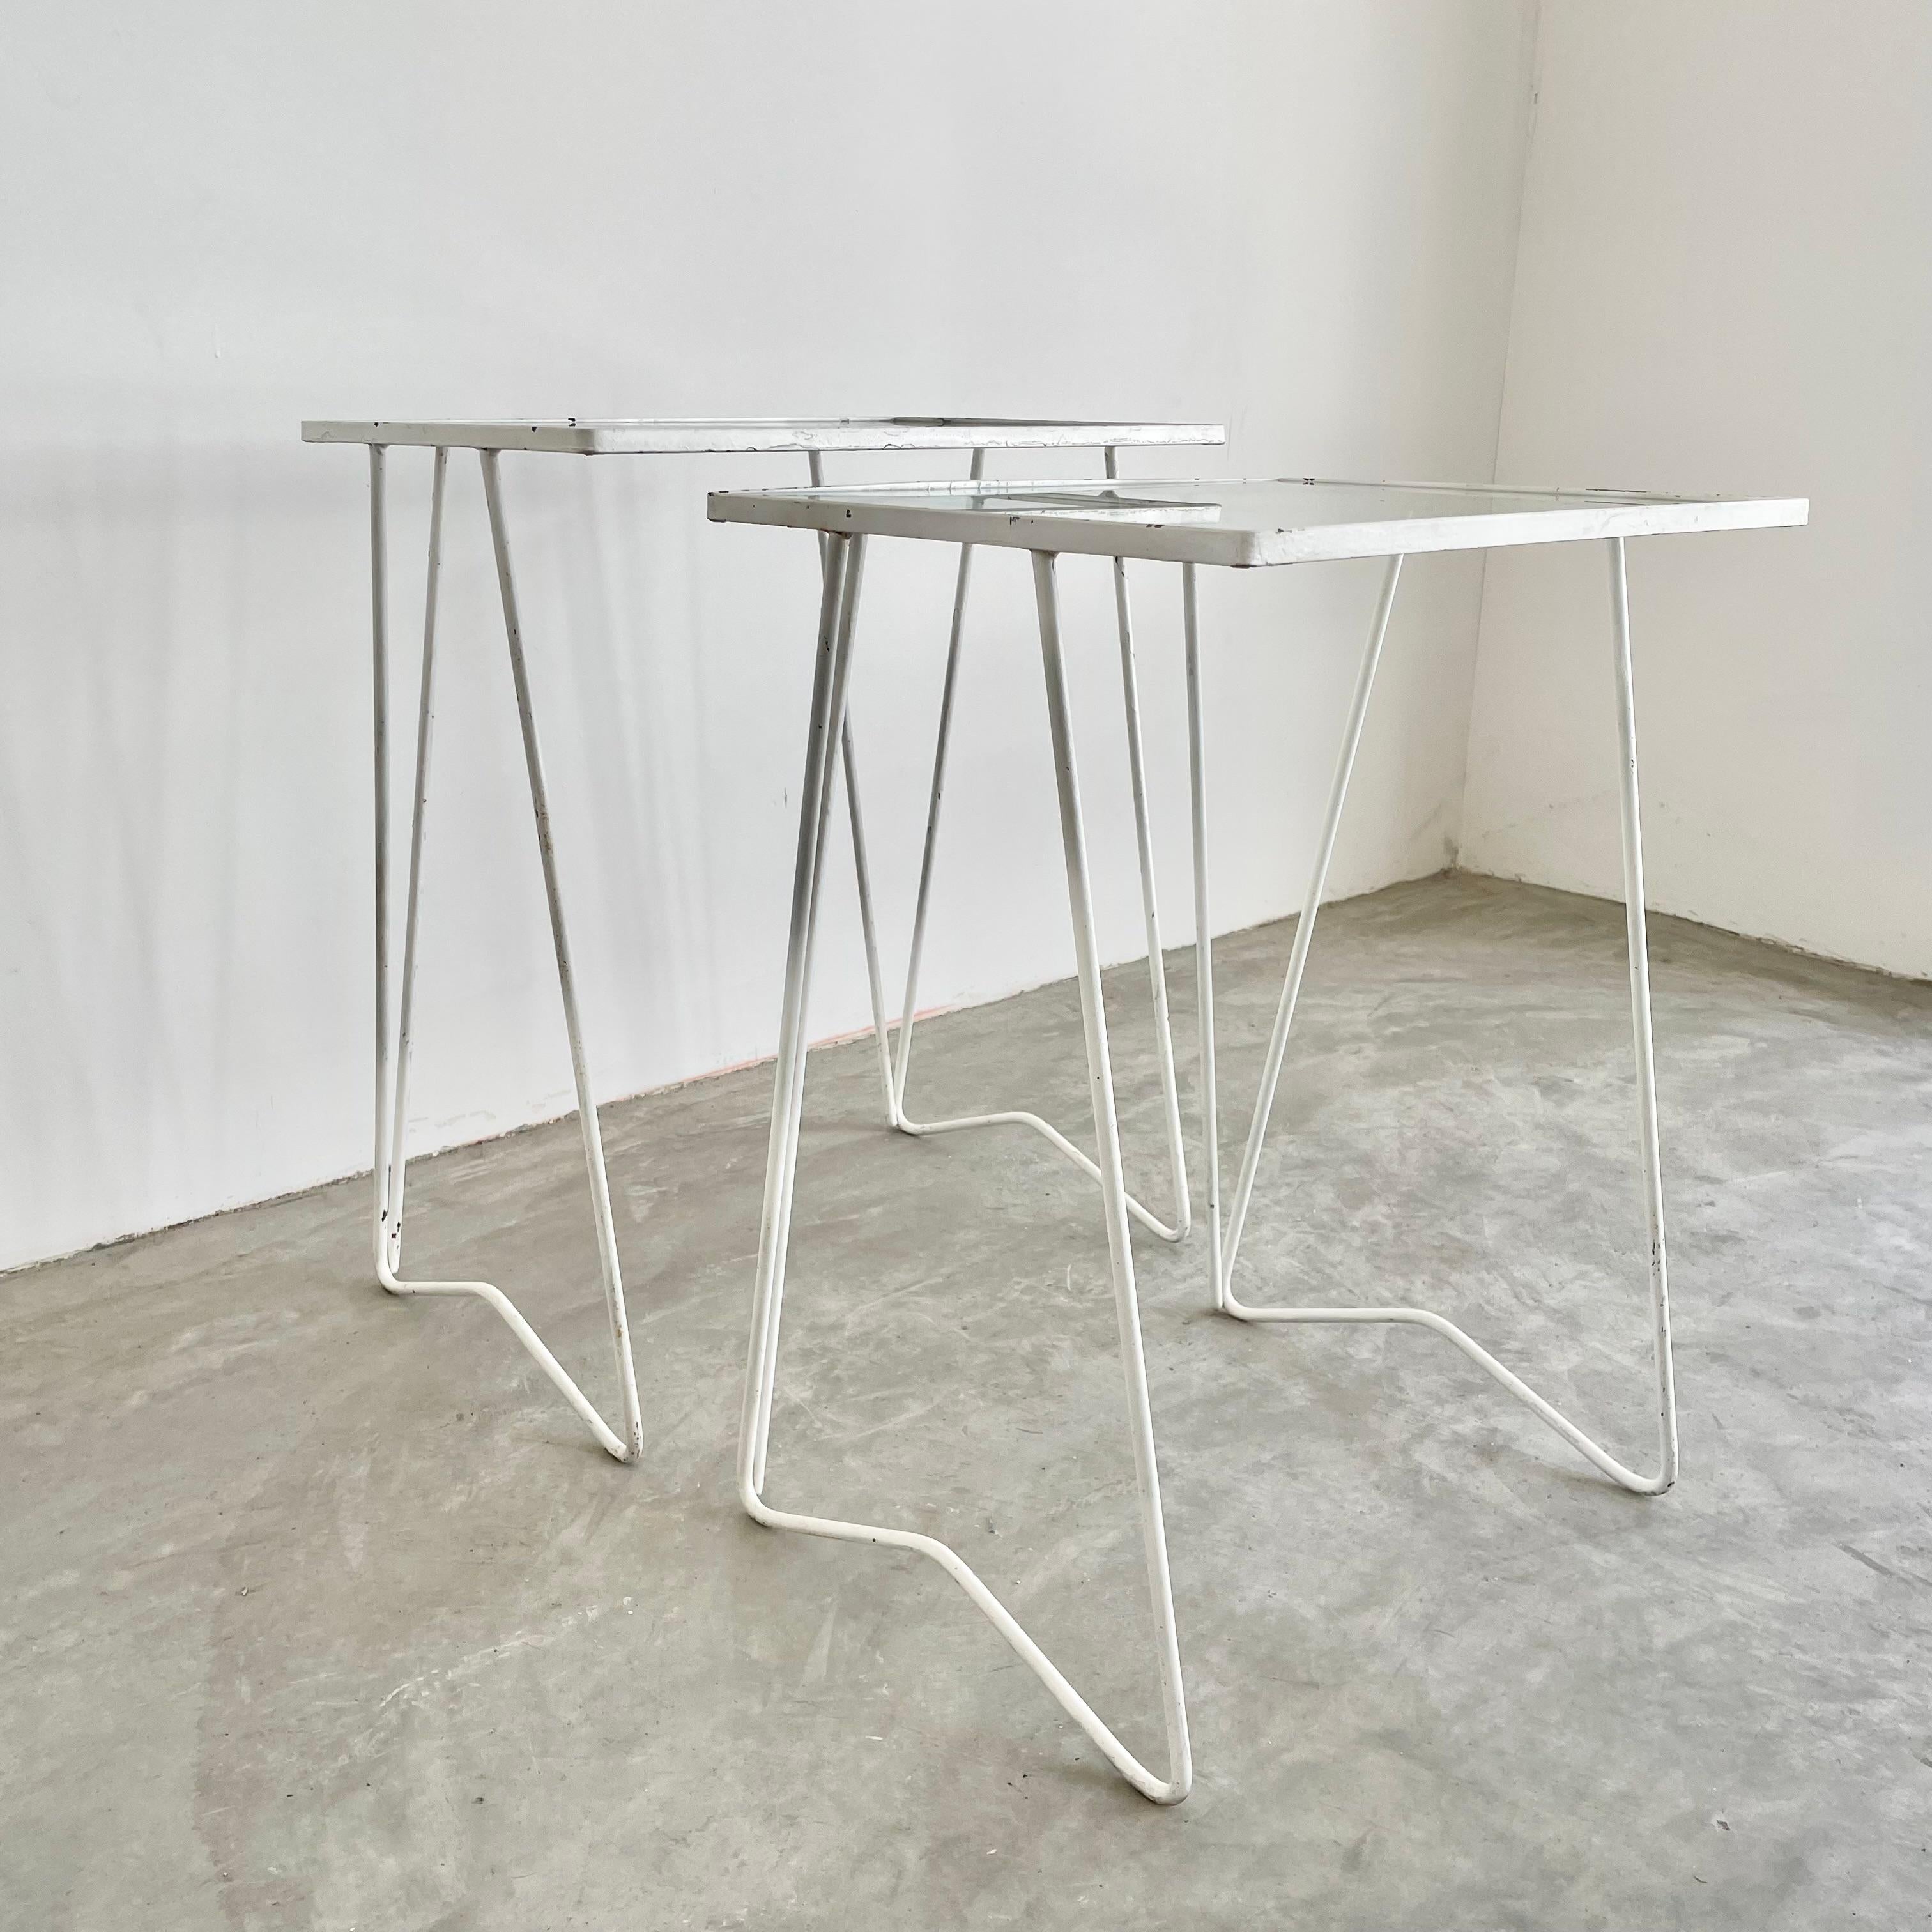 Classic pair of 1970s iron and glass nesting tables. Solid iron frame painted white with hairpin style legs and a glass table tops. Square tables look great stacked together or apart. Tables are in good vintage condition. Perfect cocktail tables for